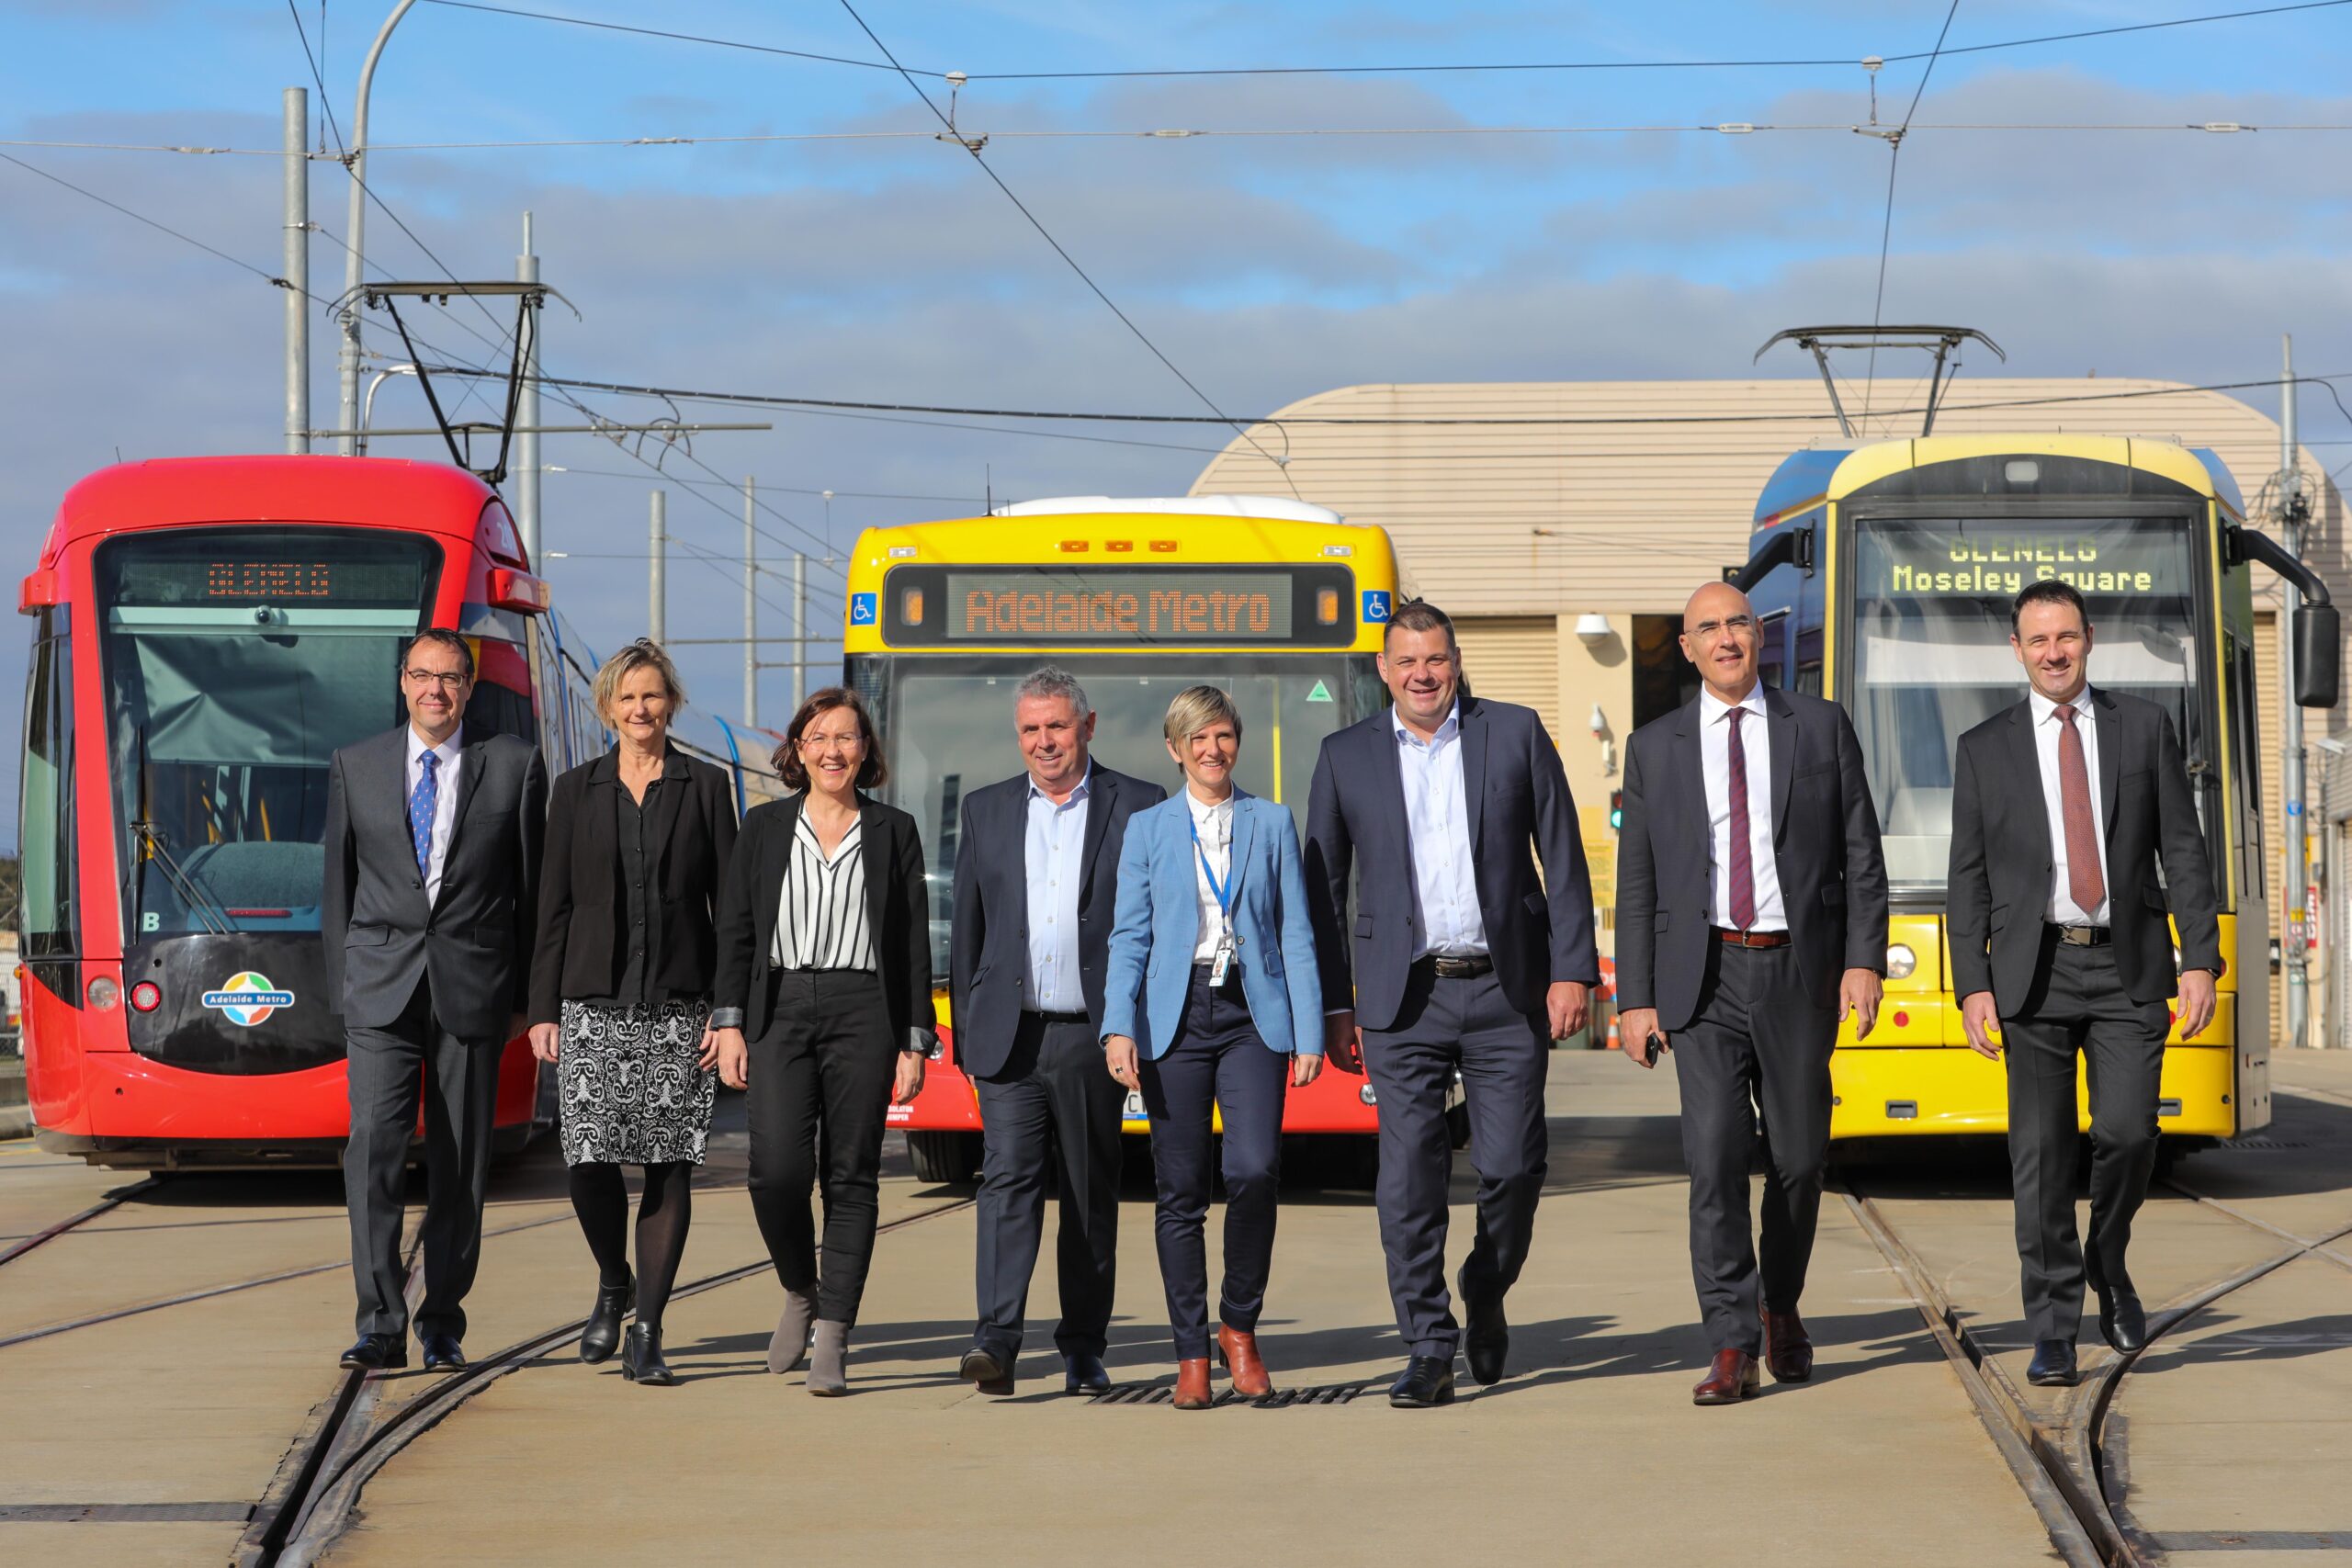 Stakeholders see tram operation - Torrens Connect